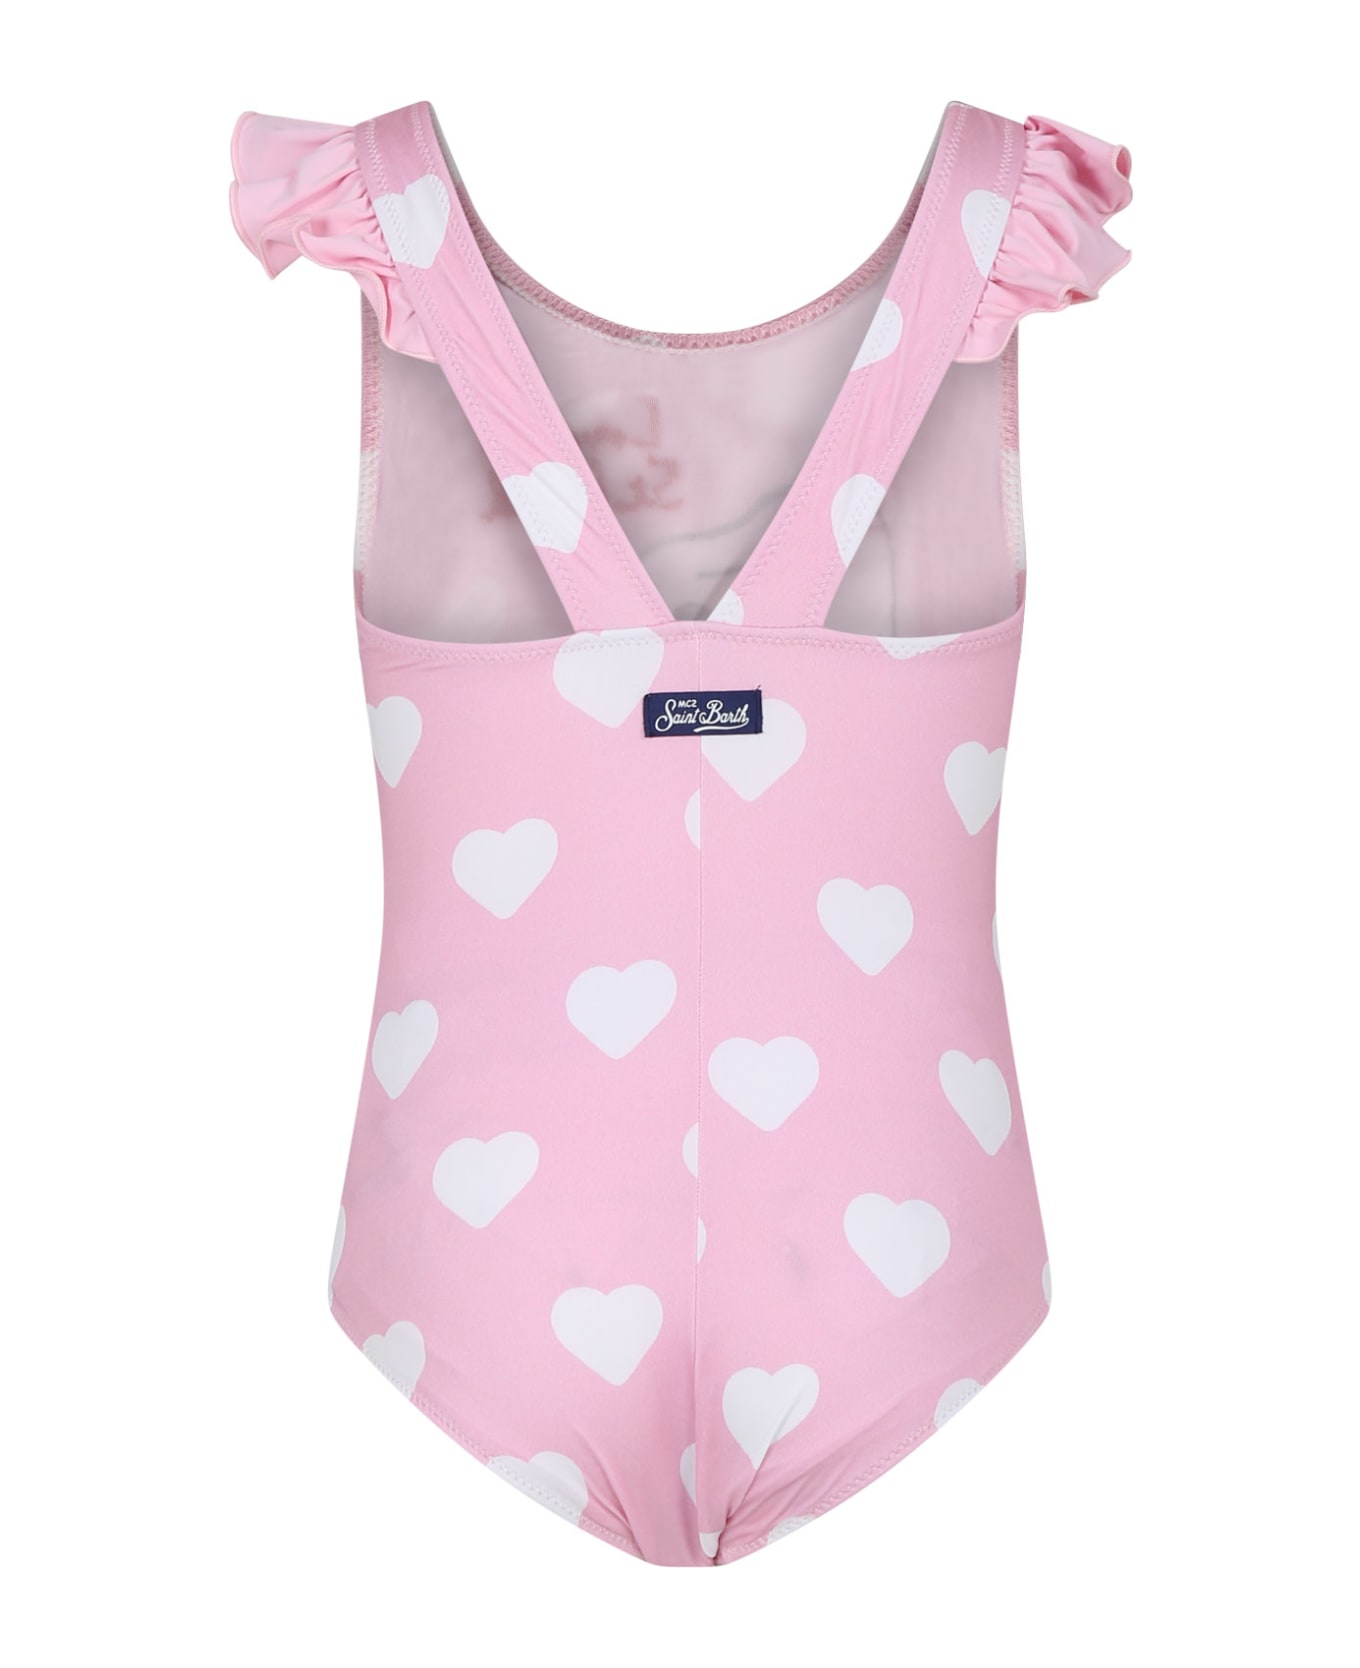 MC2 Saint Barth Pink Swimsuit For Girl With Snoopy - Pink 水着